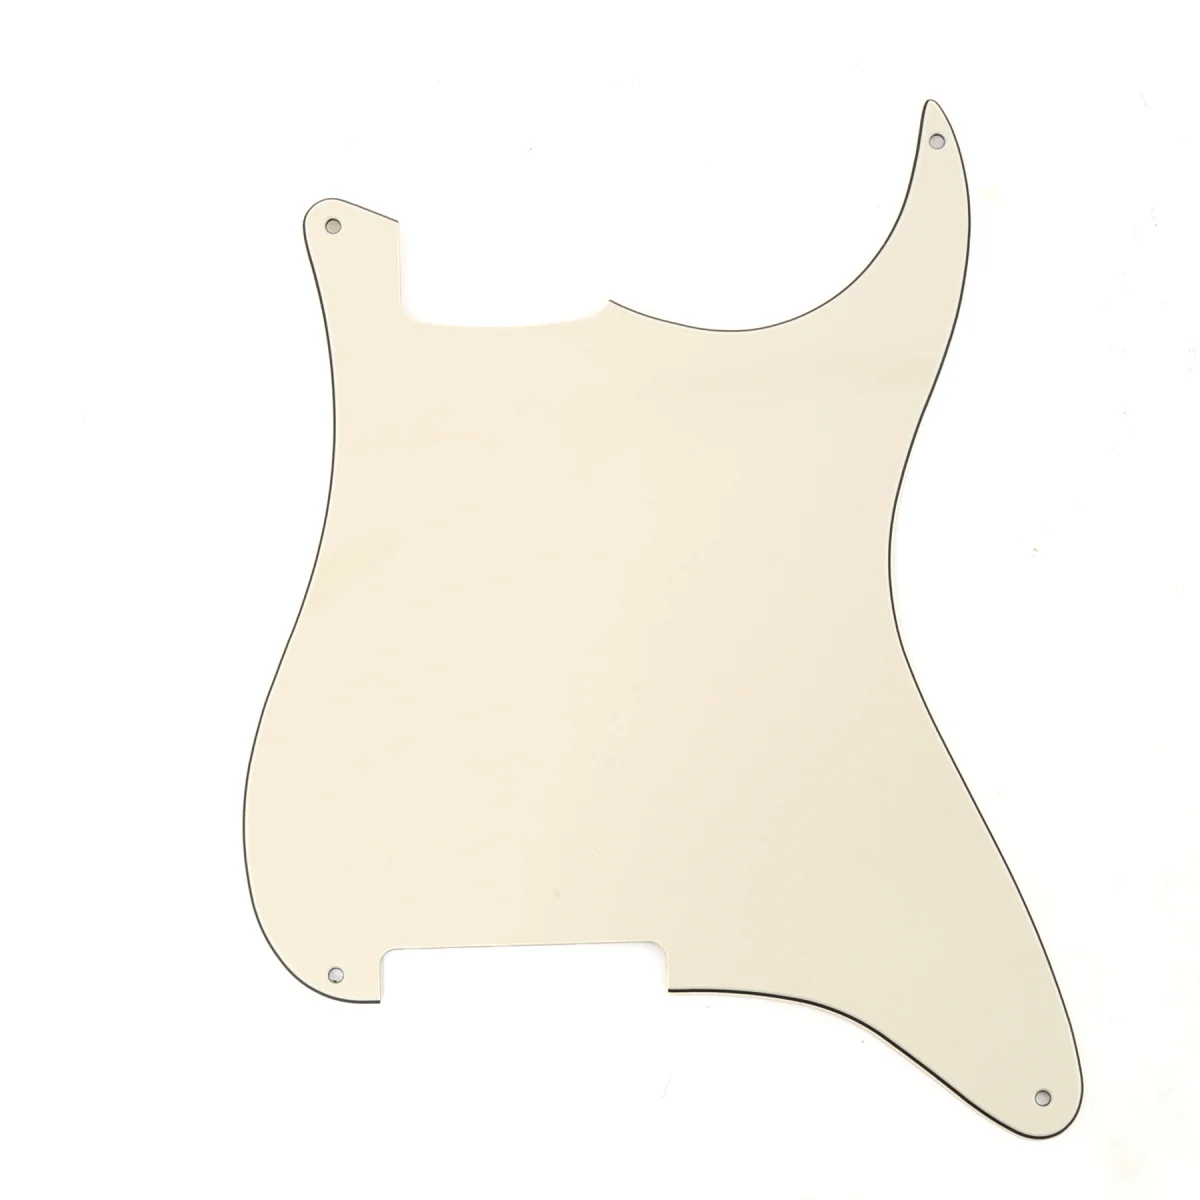 

Musiclily 4 Hole Guitar Strat Pickguard Blanks Material for Stratocaster Style Guitar Custom, 3Ply Cream